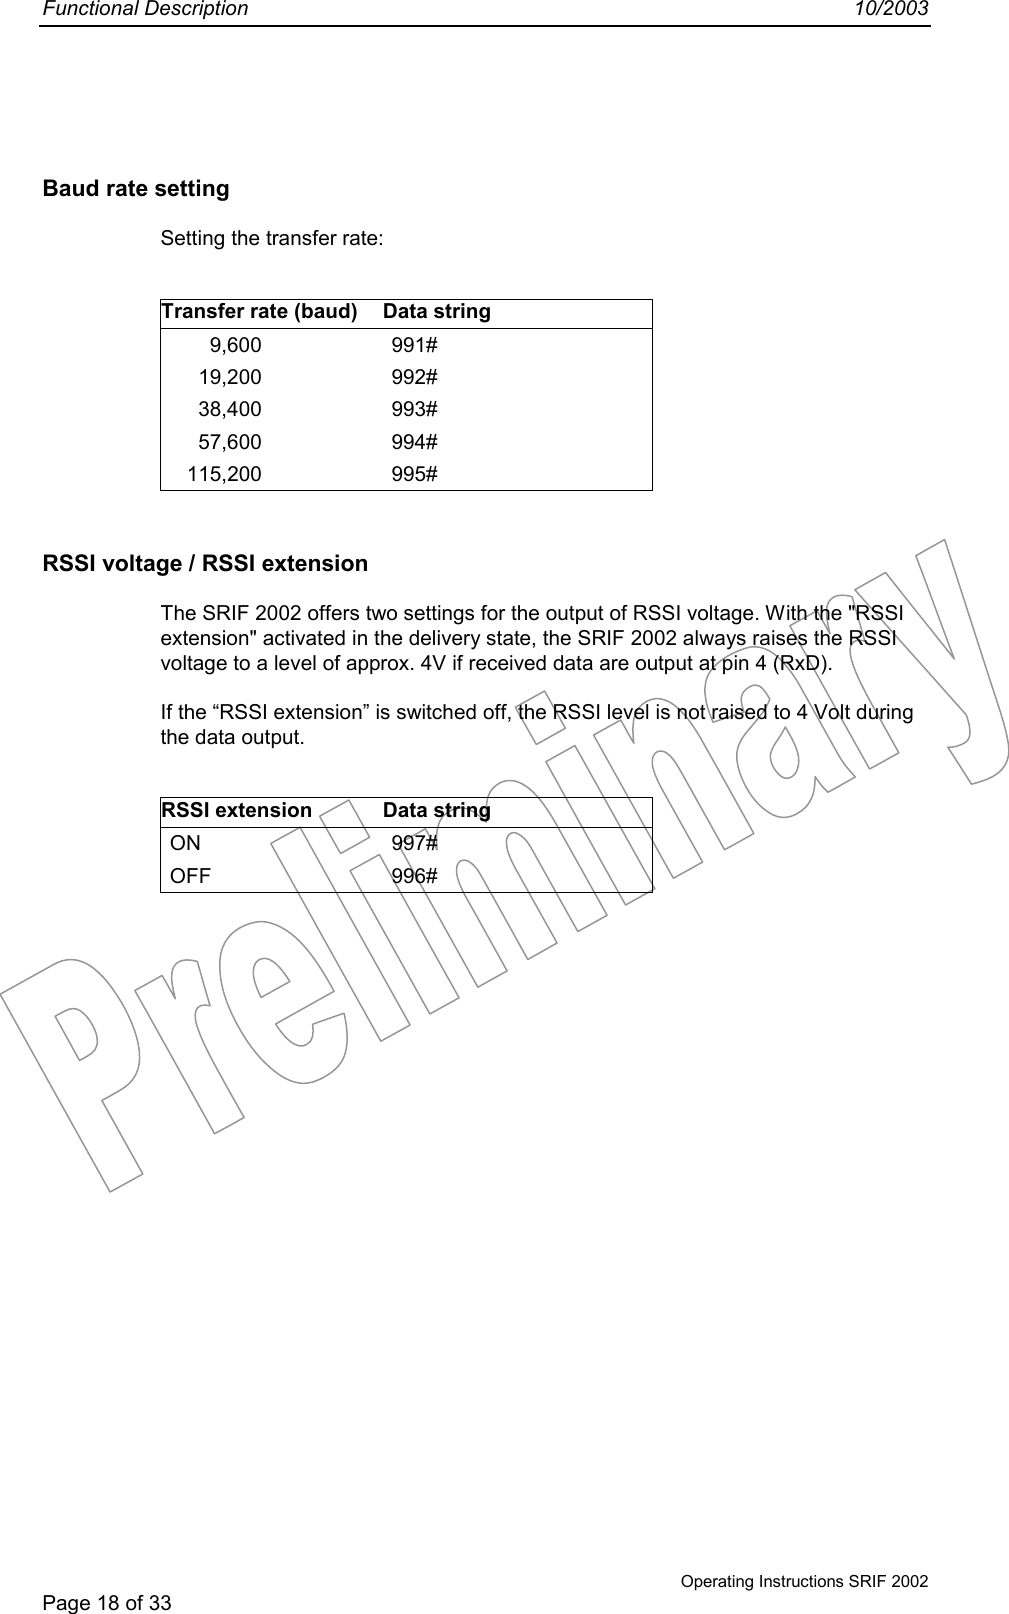 Functional Description 10/2003Operating Instructions SRIF 2002Page 18 of 33Baud rate settingSetting the transfer rate:Transfer rate (baud) Data string9,600 991#19,200 992#38,400 993#57,600 994#115,200 995#RSSI voltage / RSSI extensionThe SRIF 2002 offers two settings for the output of RSSI voltage. With the &quot;RSSIextension&quot; activated in the delivery state, the SRIF 2002 always raises the RSSIvoltage to a level of approx. 4V if received data are output at pin 4 (RxD).If the “RSSI extension” is switched off, the RSSI level is not raised to 4 Volt duringthe data output.RSSI extension Data stringON 997#OFF 996#